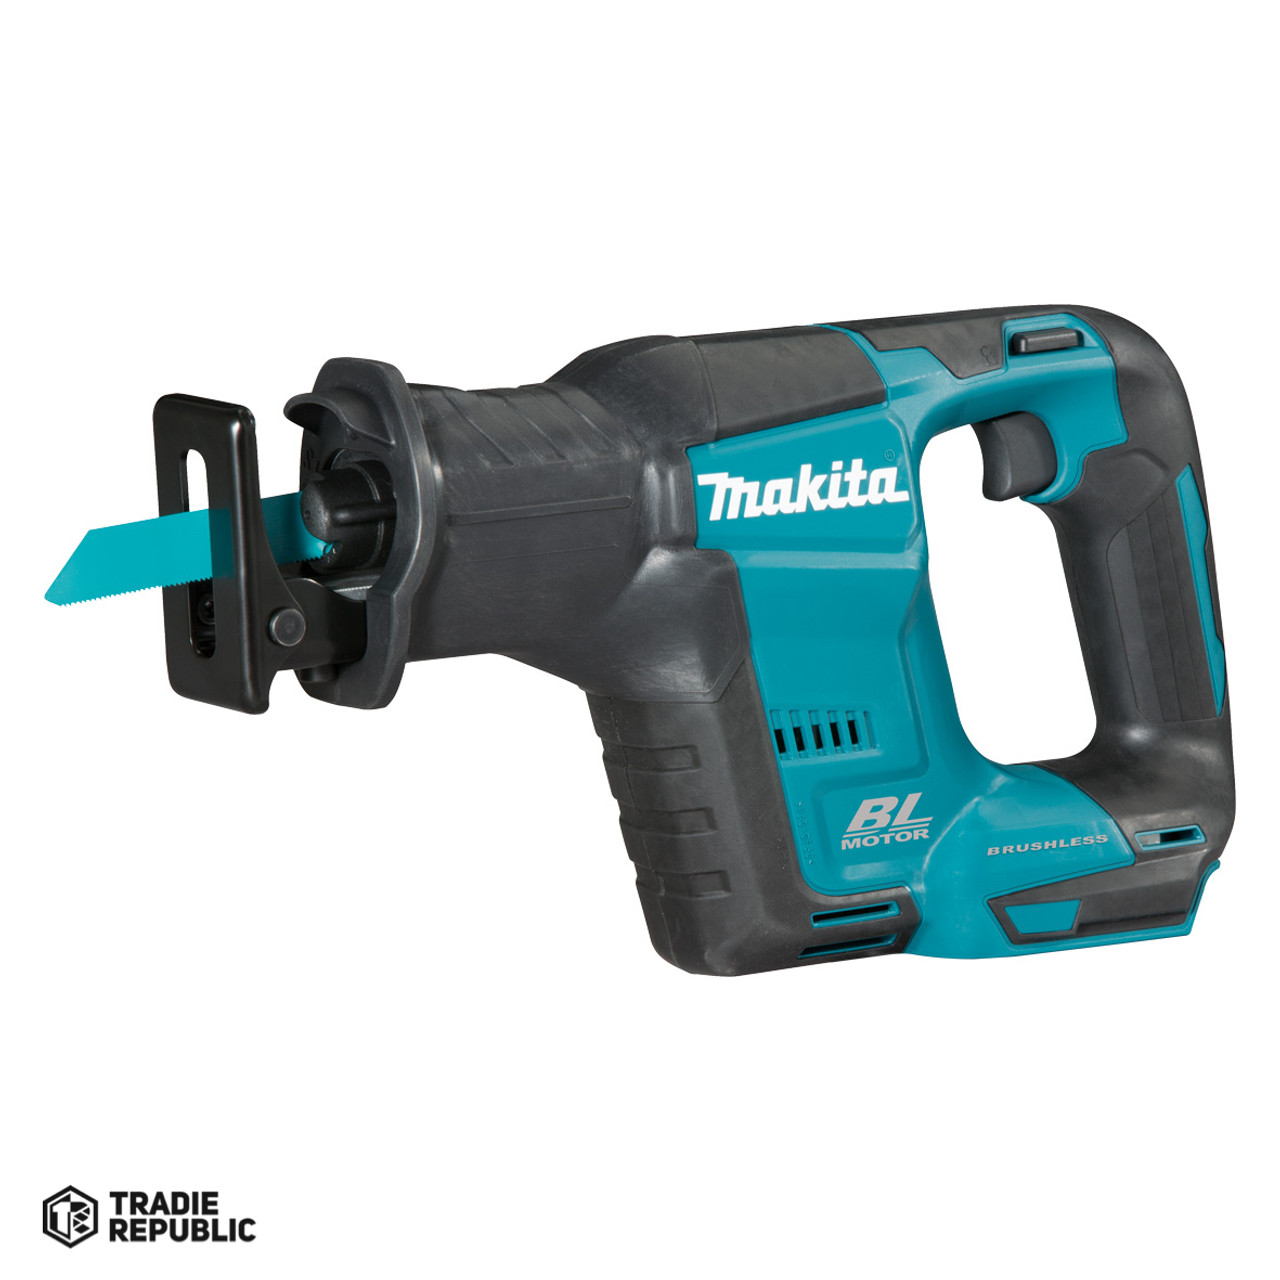 DJR188Z Makita 18V LXT  Sub-Compact Brushless  Recipro Saw, Tool Only